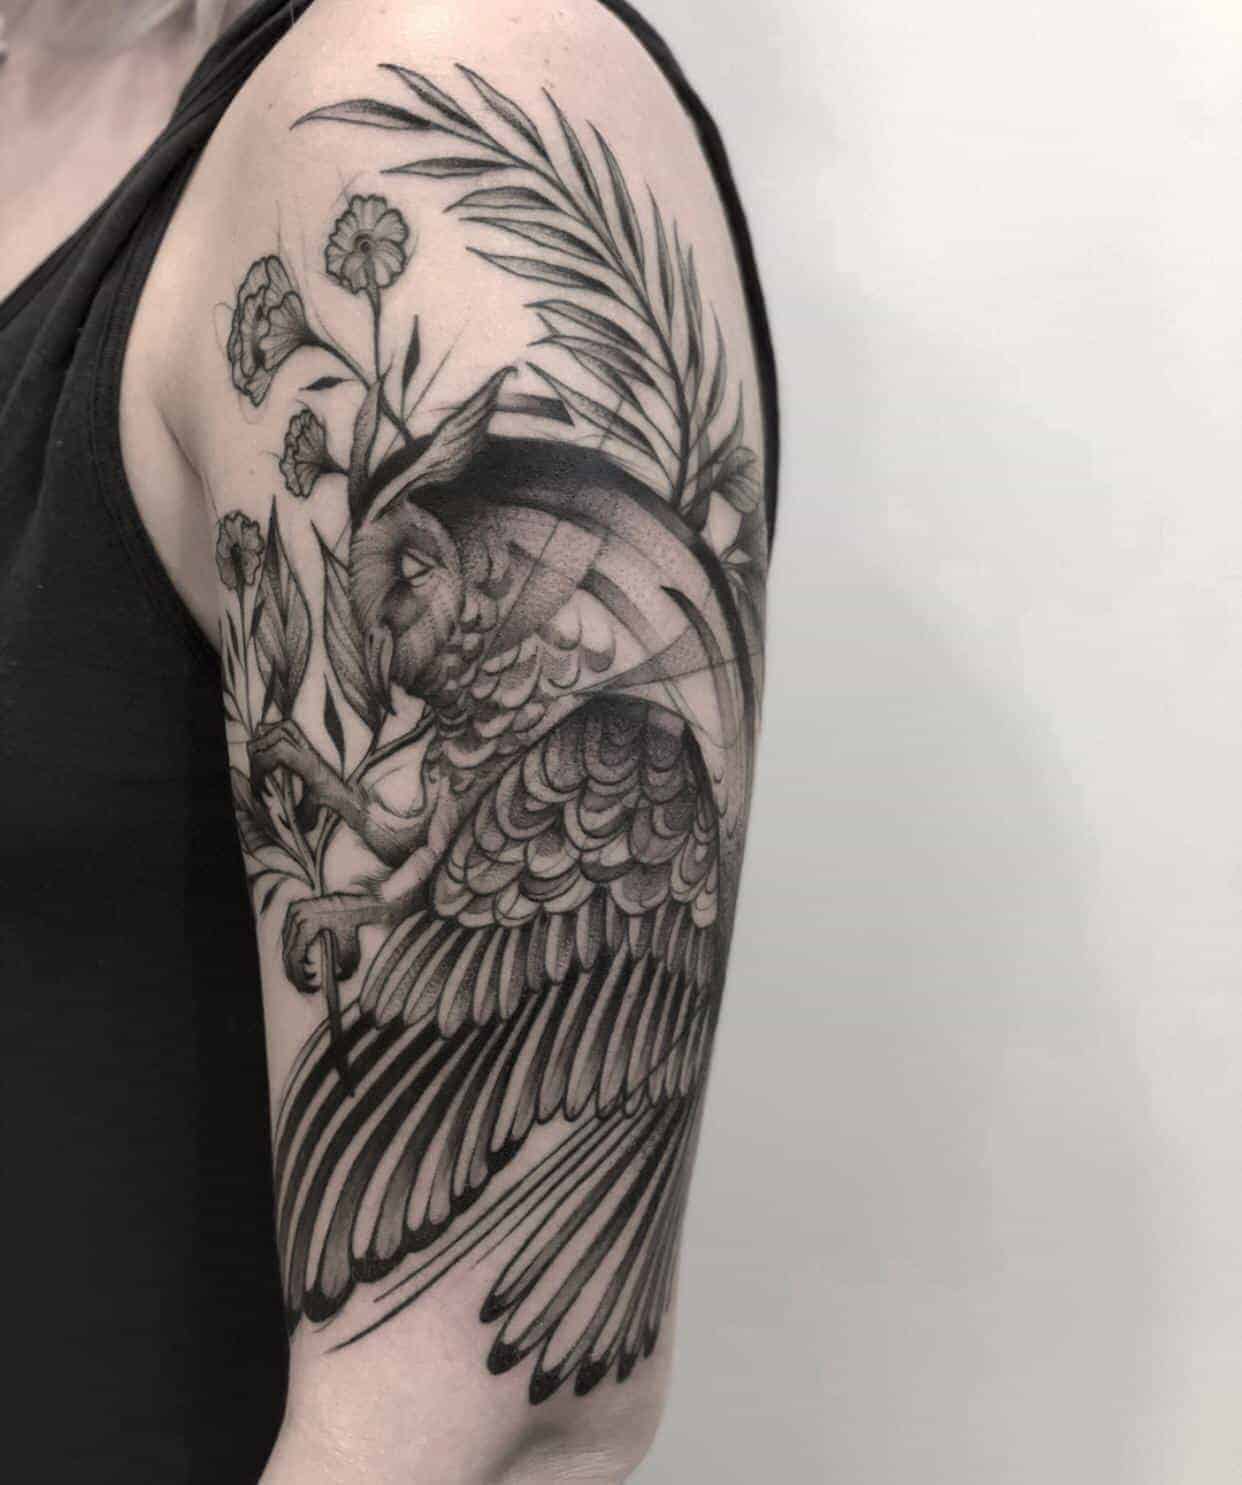 30 Owl Tattoo Ideas To Inspire Your Own